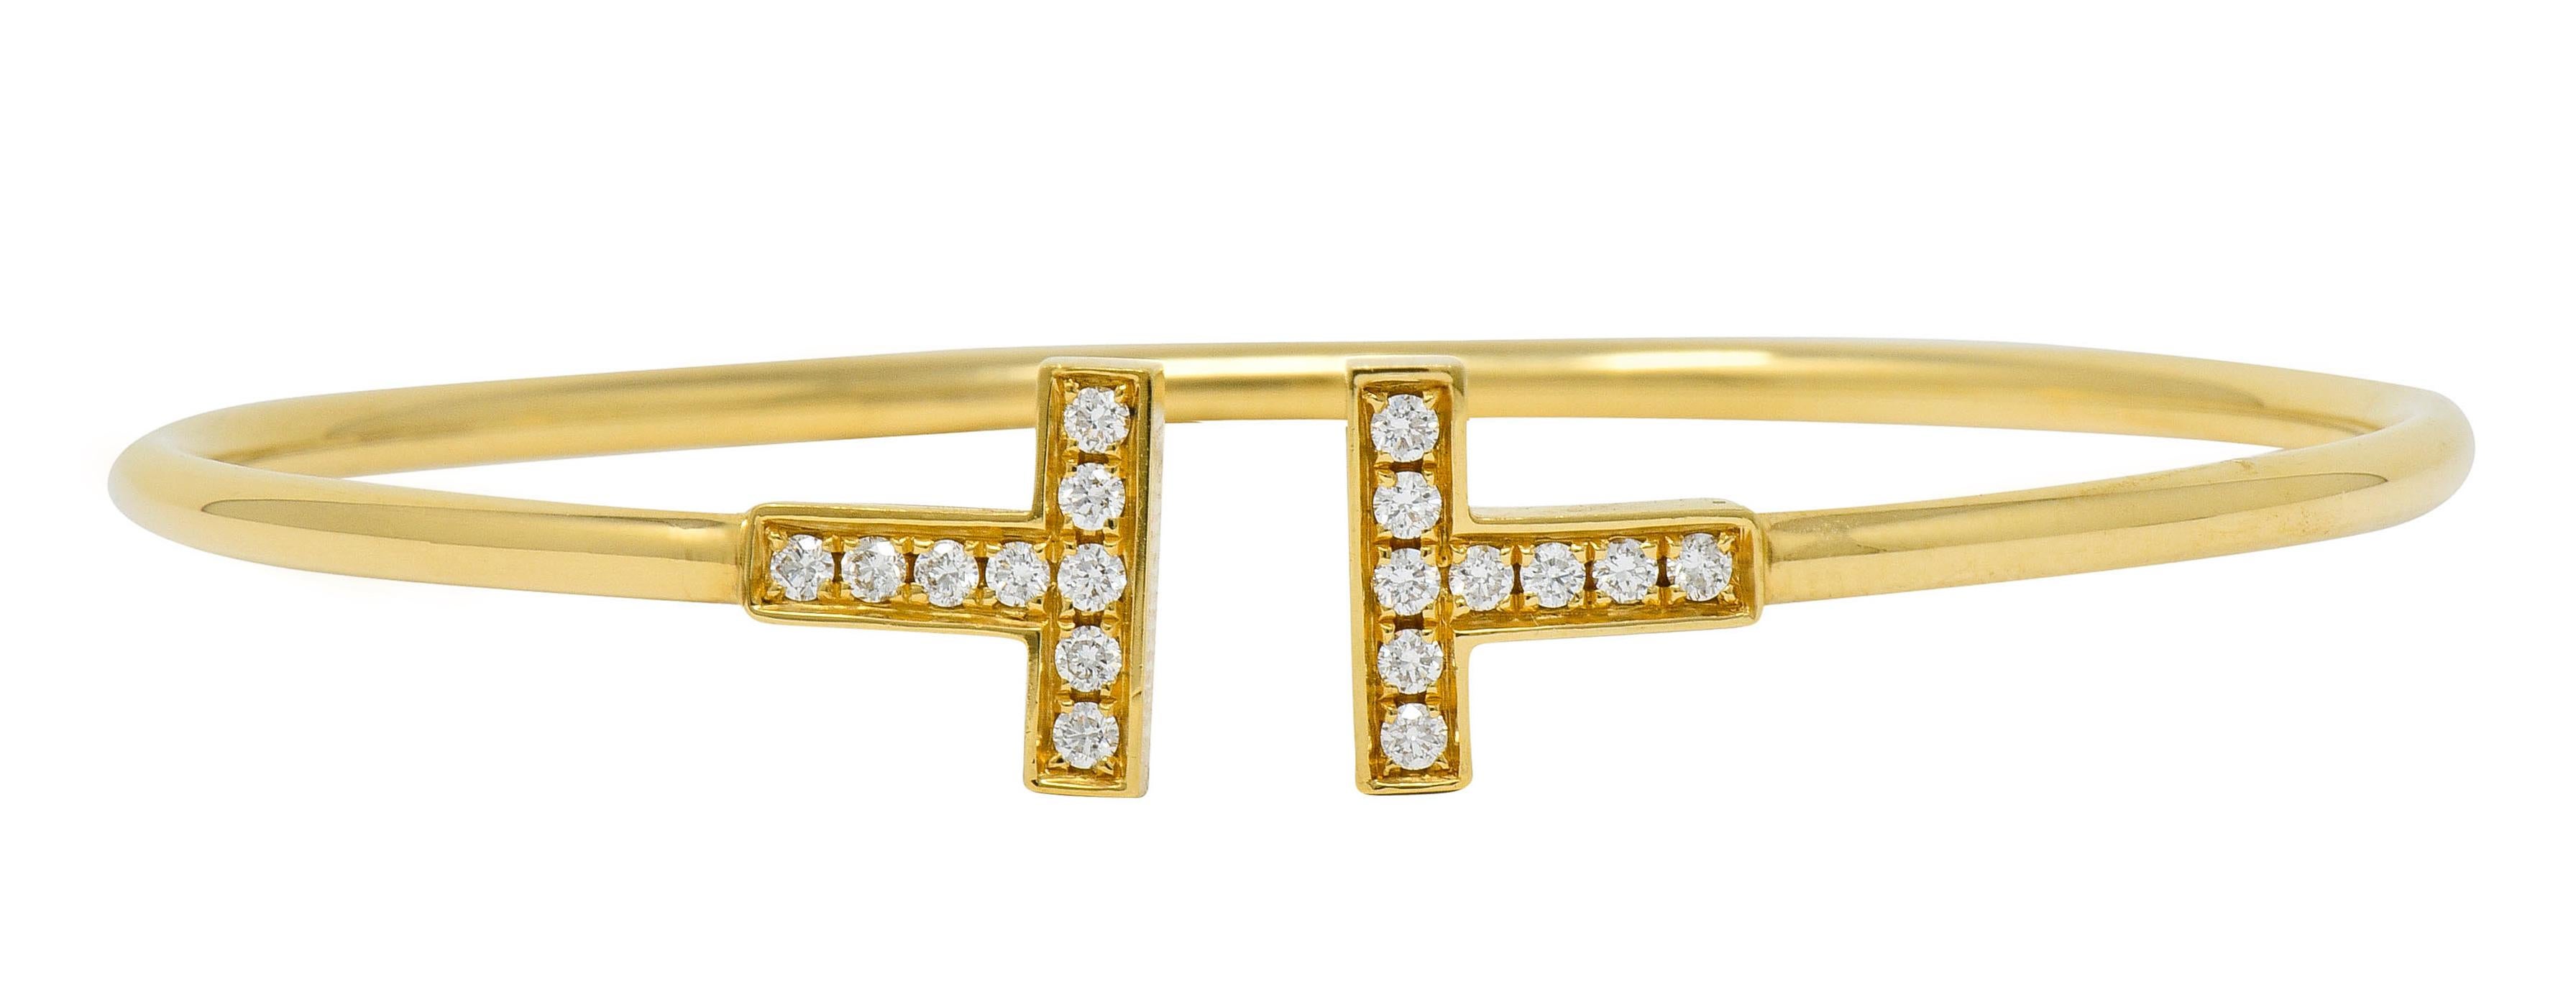 Thin and flexible cuff style bracelet that terminates as two polished gold T's

Terminals are bead set with round brilliant cut diamonds weighing approximately 0.22 carat; eye-clean and white

Signed T & Co. Italy

Stamped AU750 for 18 karat